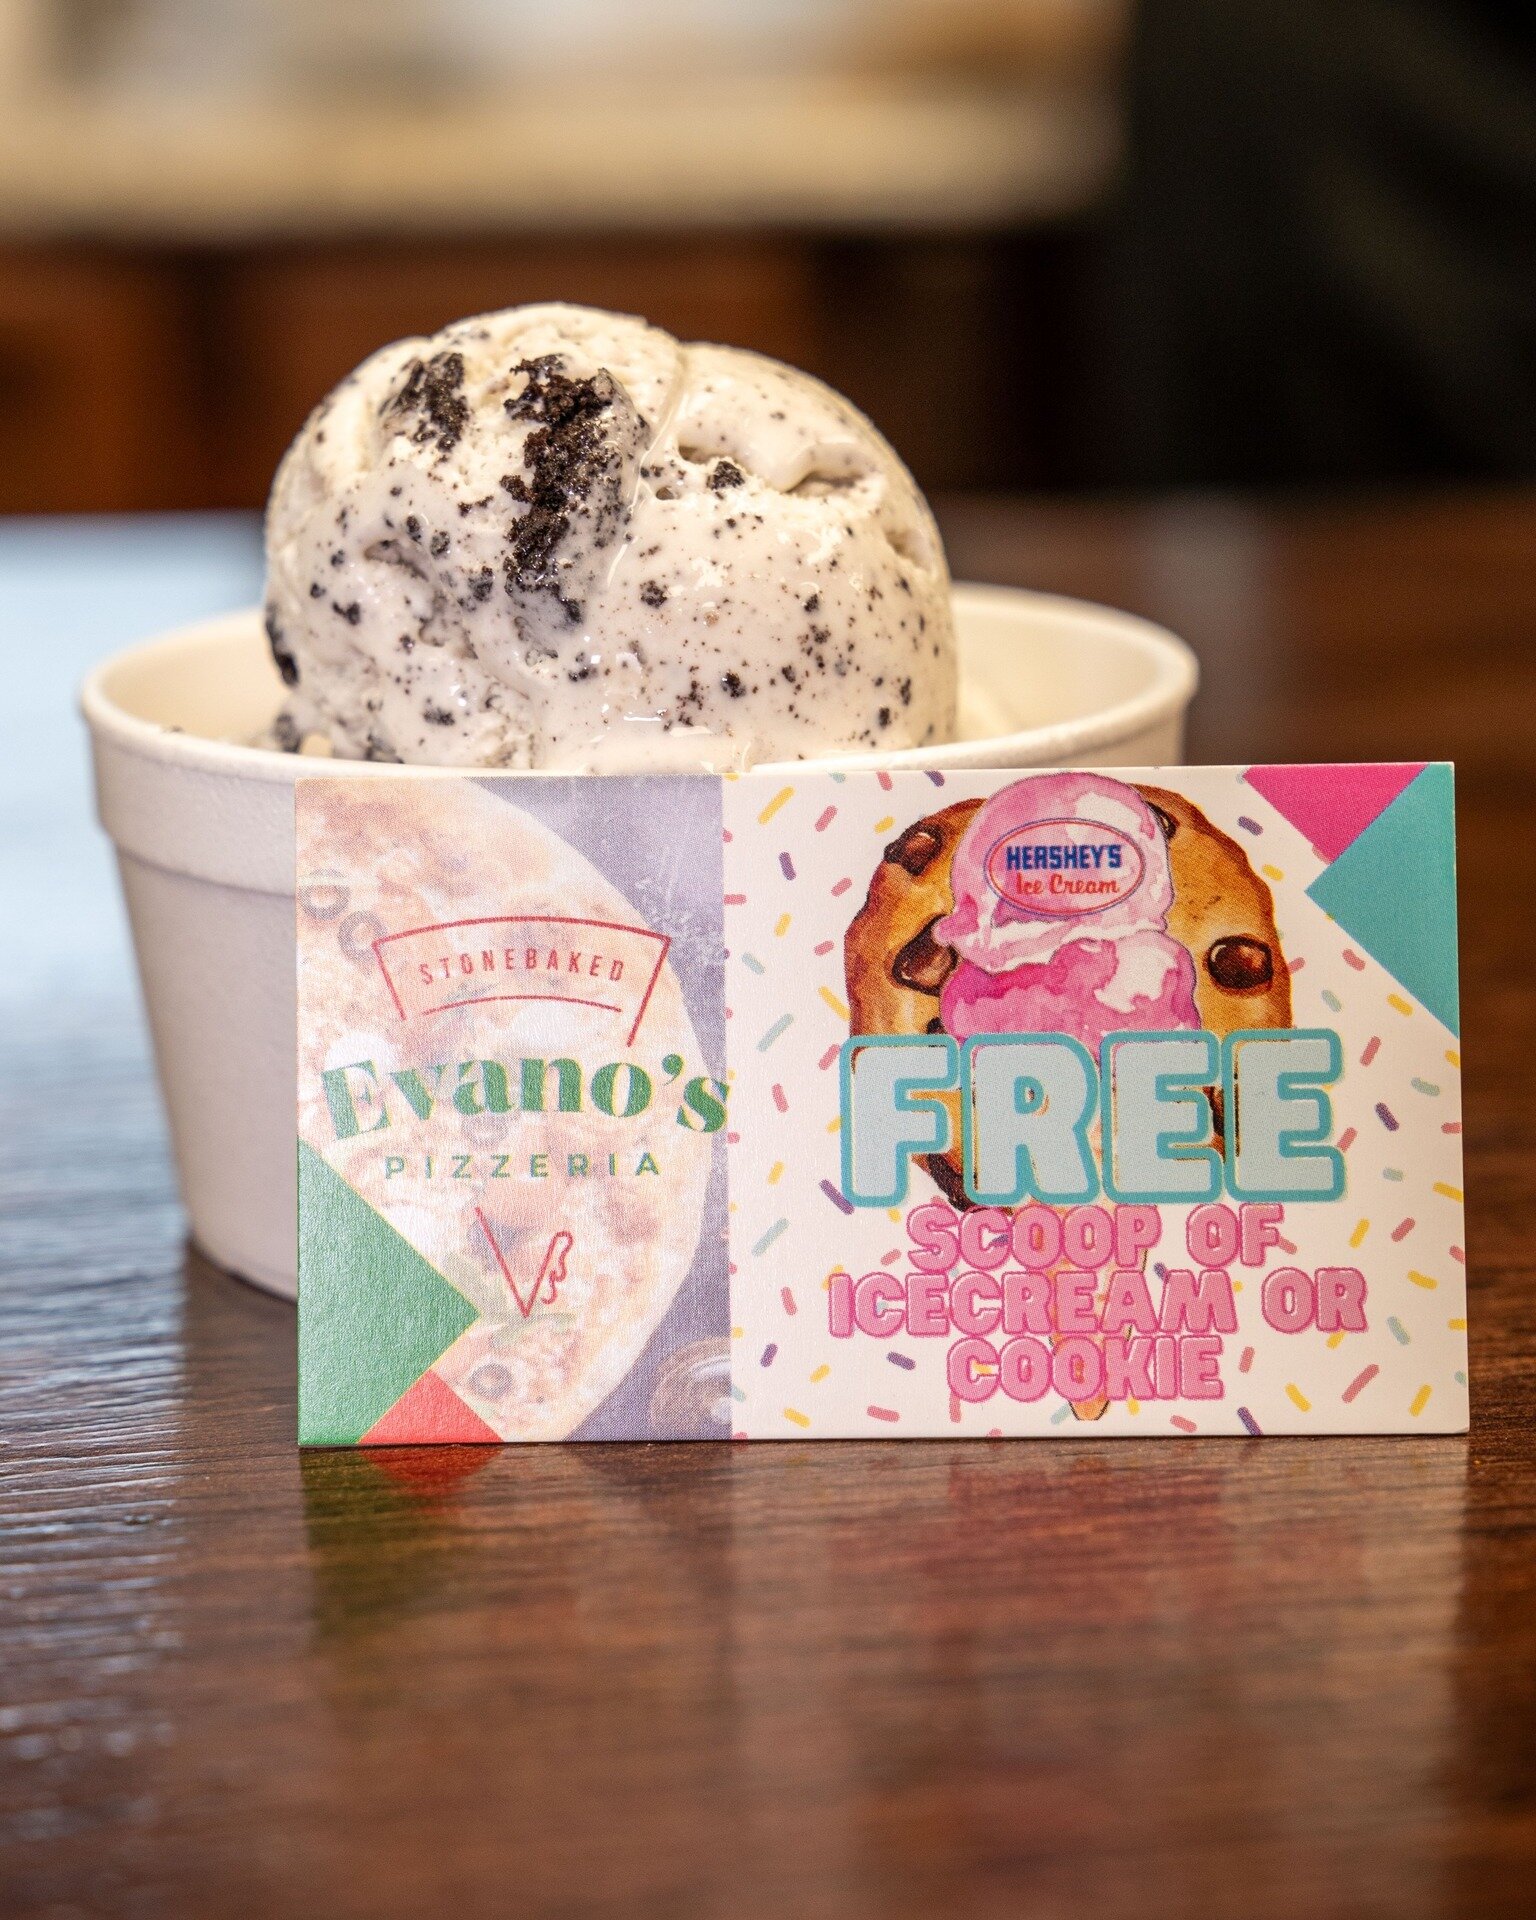 Come enjoy a free scoop of ice cream tomorrow from 1:00 - 3:00! best way to cool off!